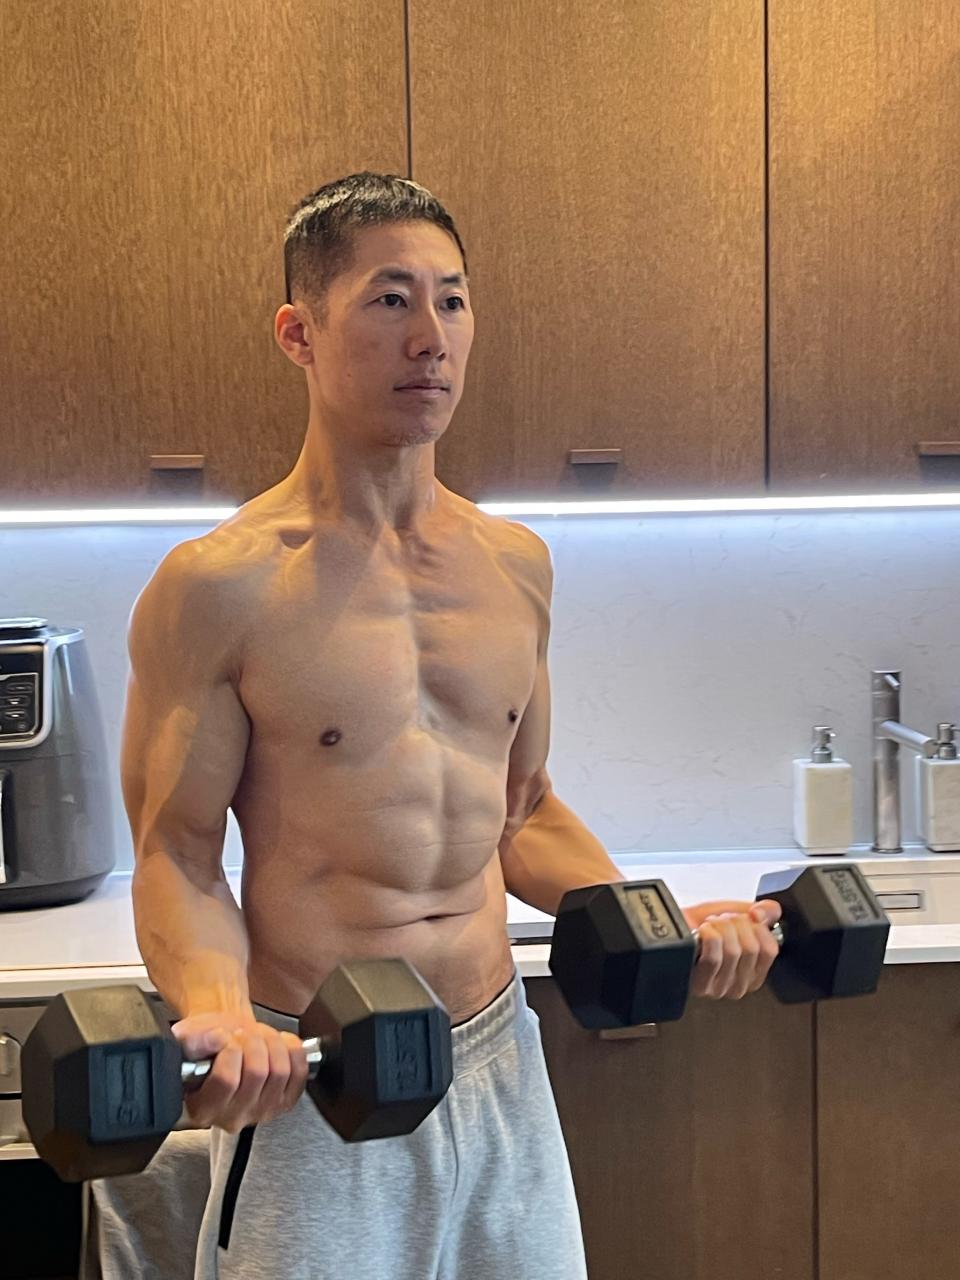 More energy and defined abs — here's how one man finally got the body he wanted by doing less in the gym